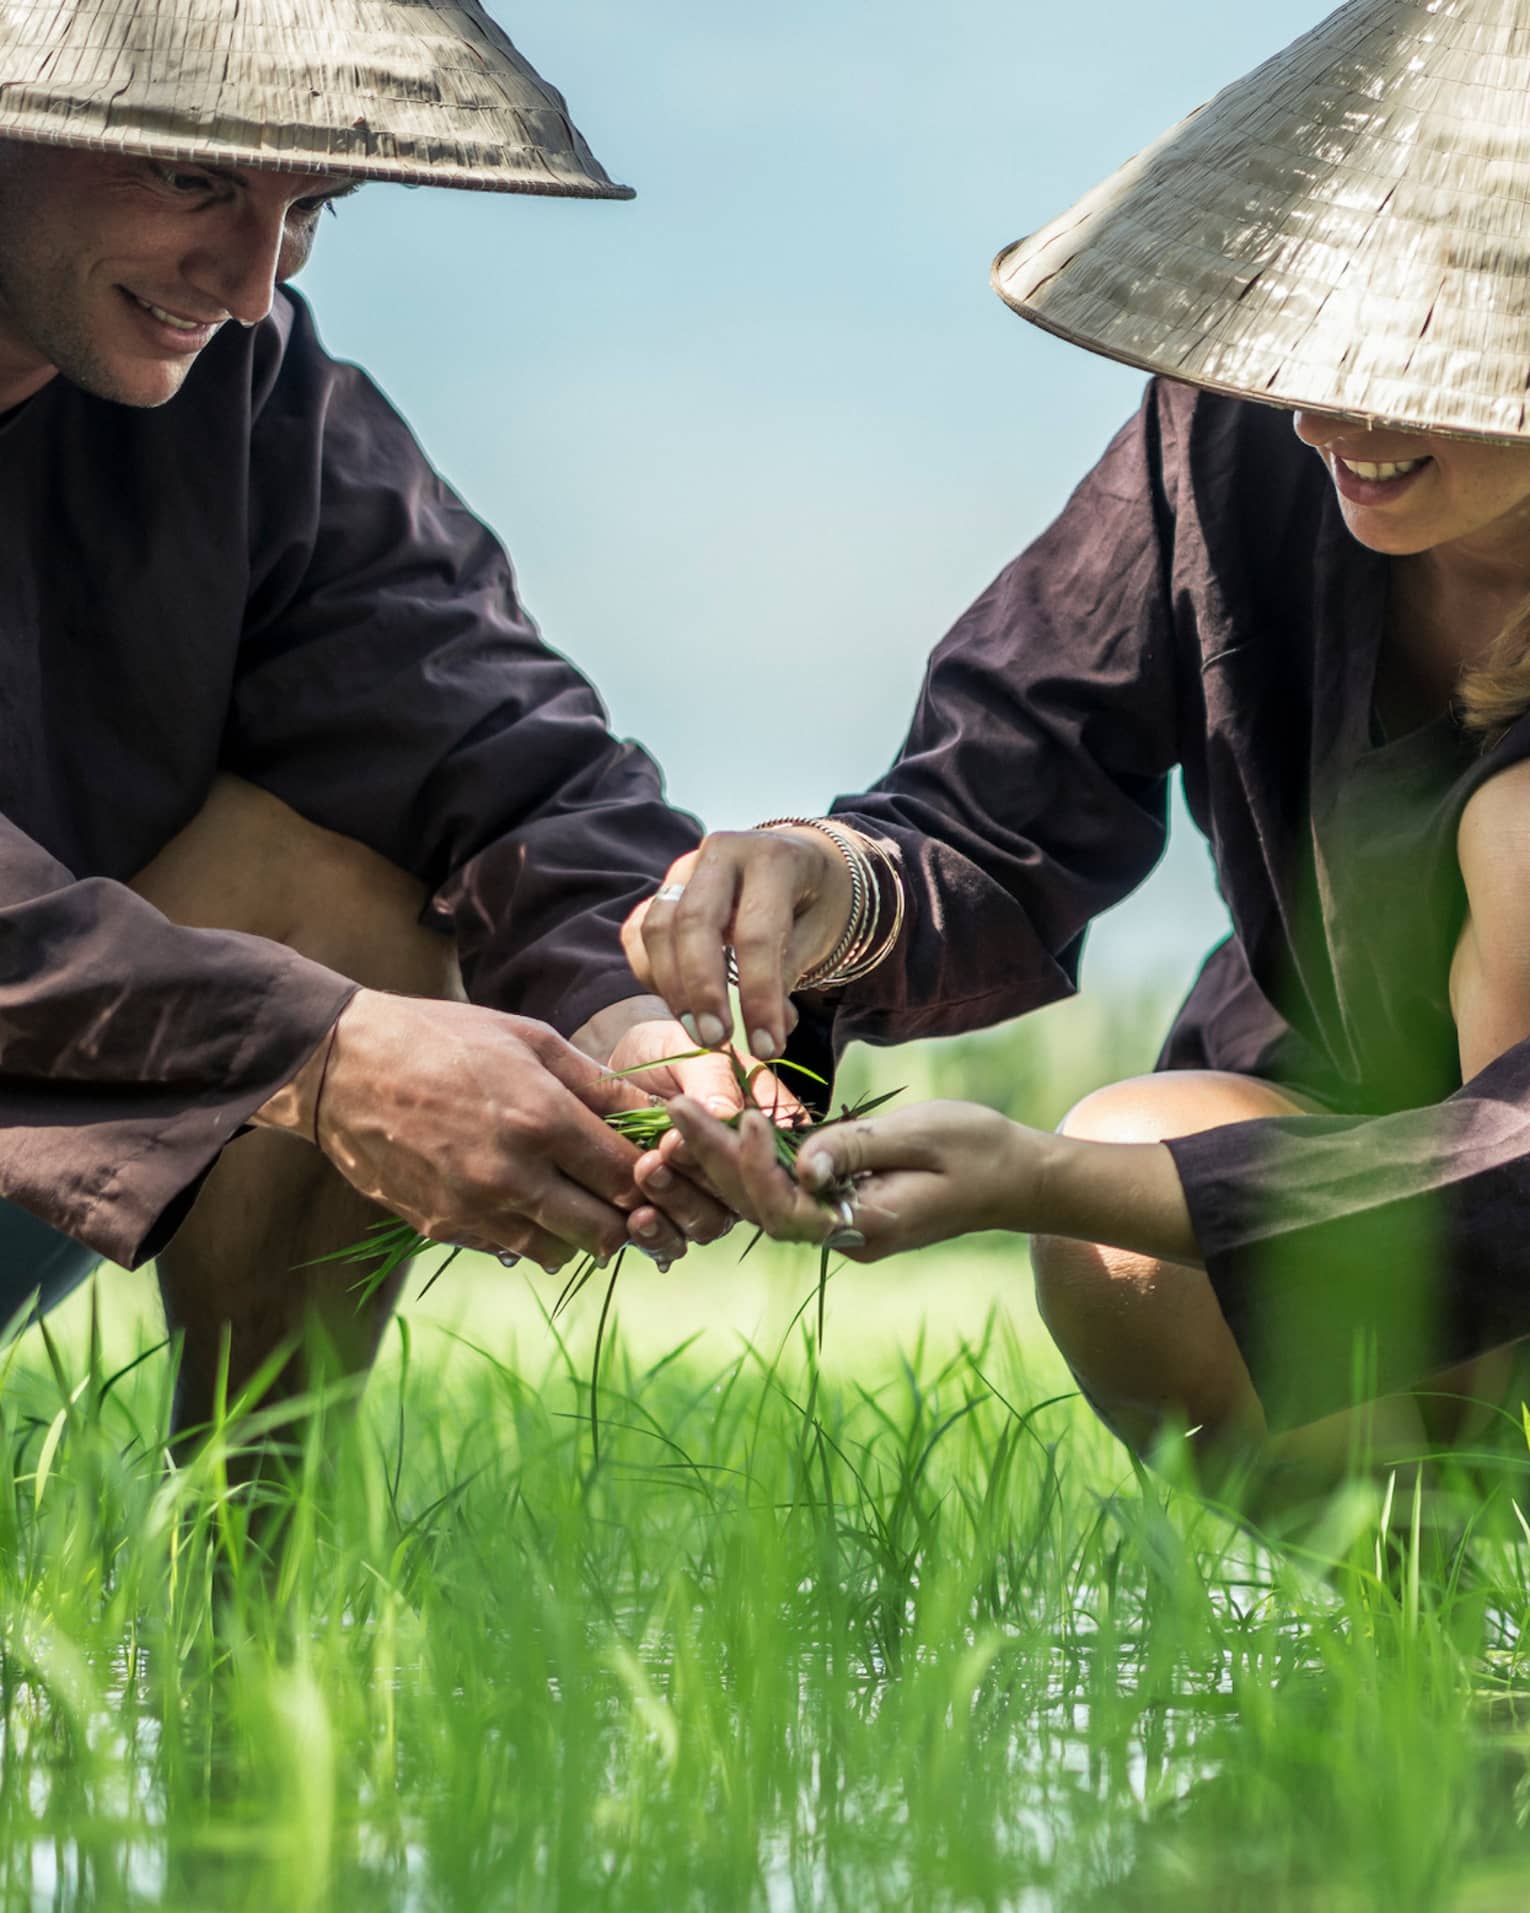 Couple wearing traditional farmer hats plant rice seedlings in water, grass